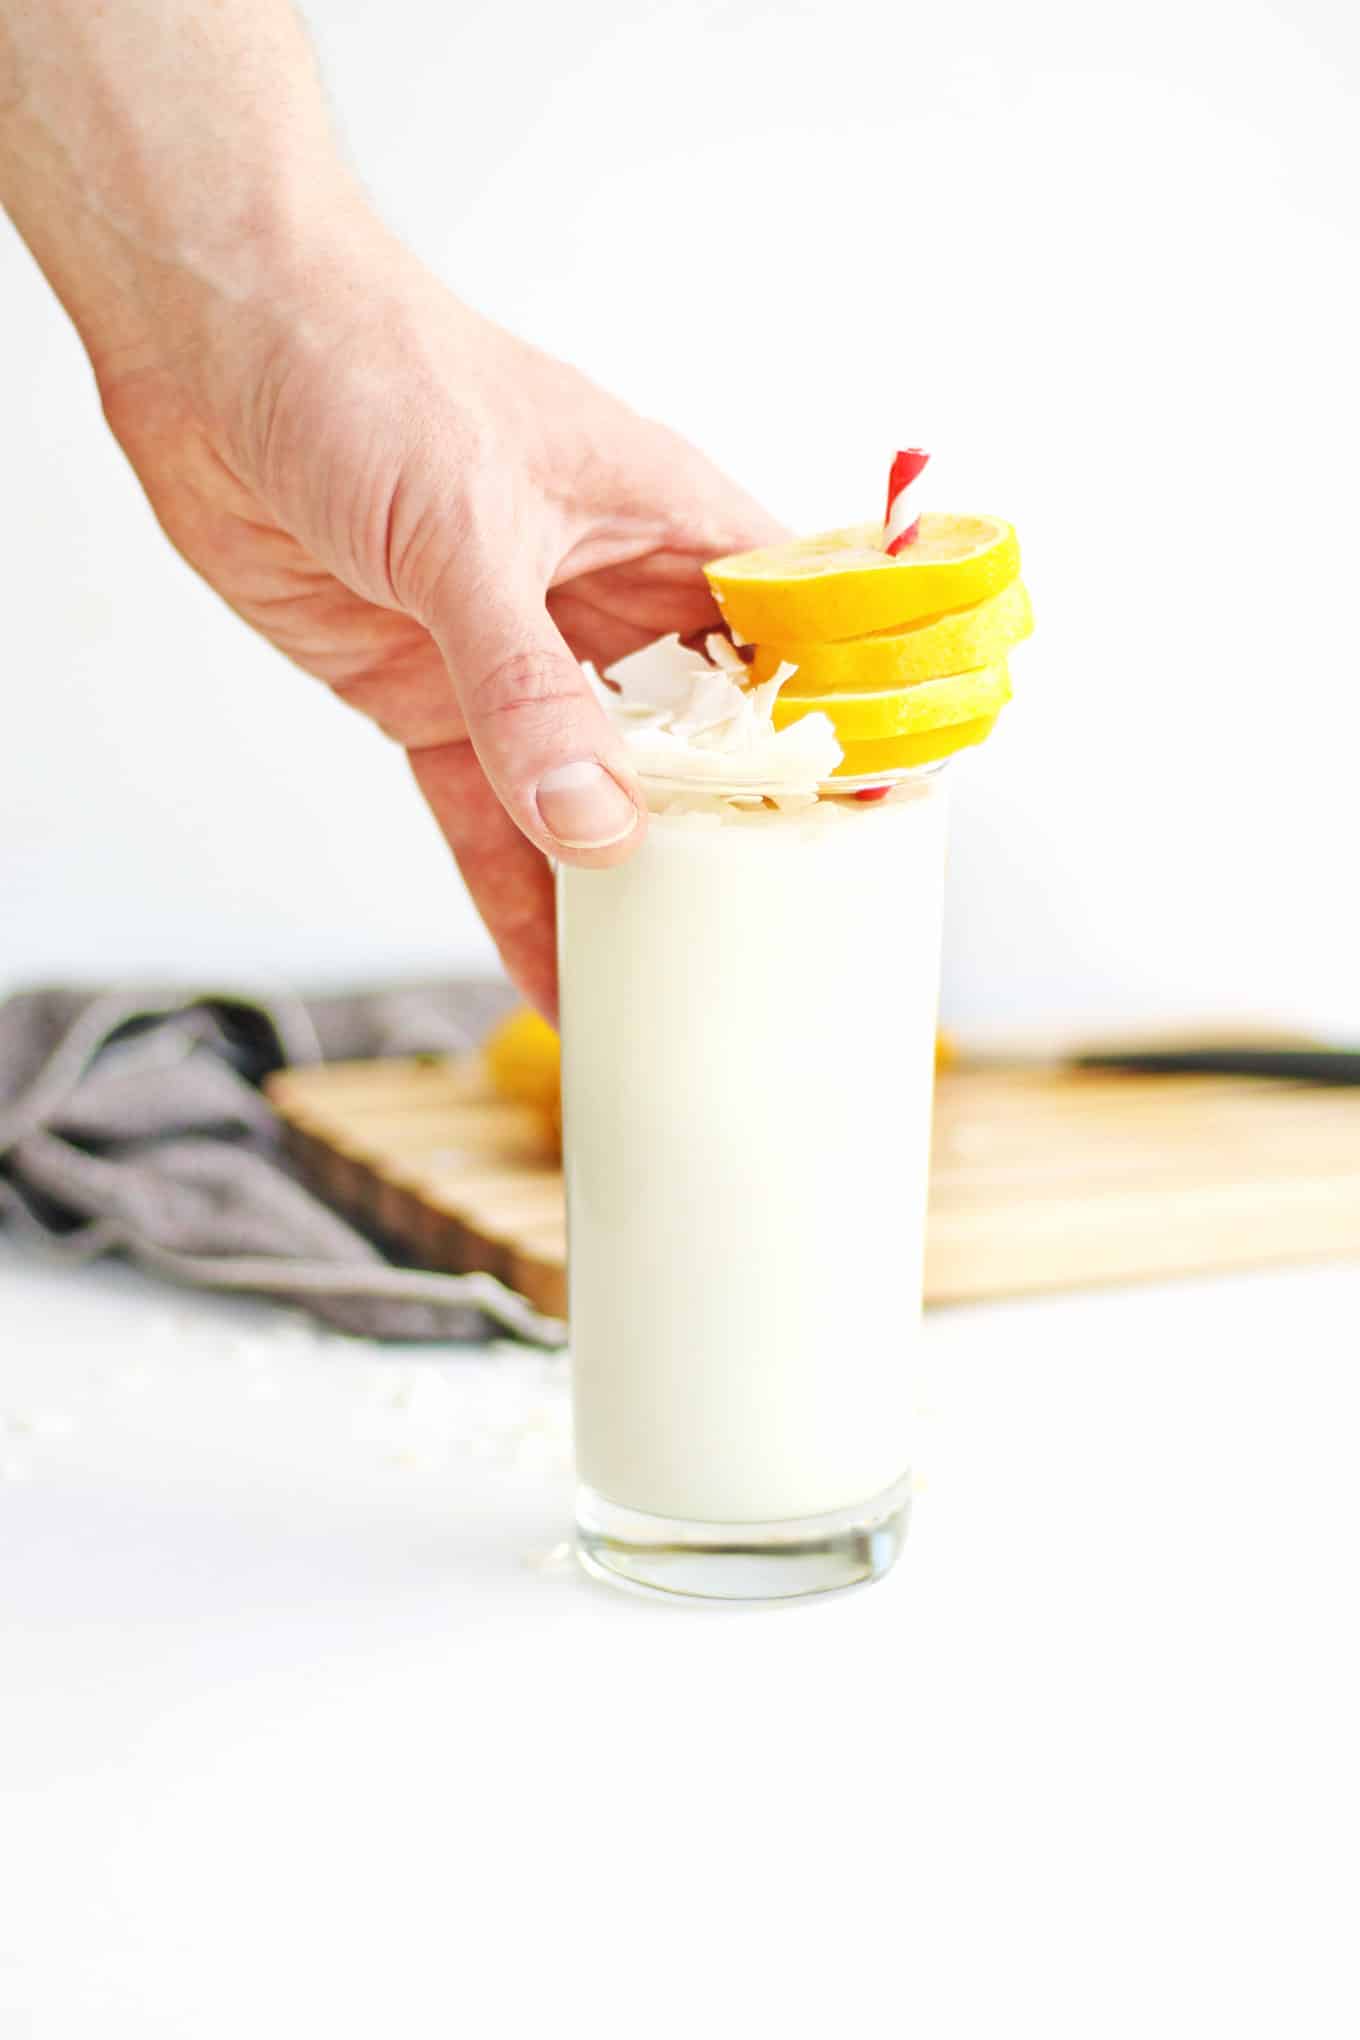 Healthy lemon coconut smoothie recipe! A tart, yet sweet way to load up on probiotics and nutrients. // Rhubarbarians // yogurt smoothie / tropical smoothie